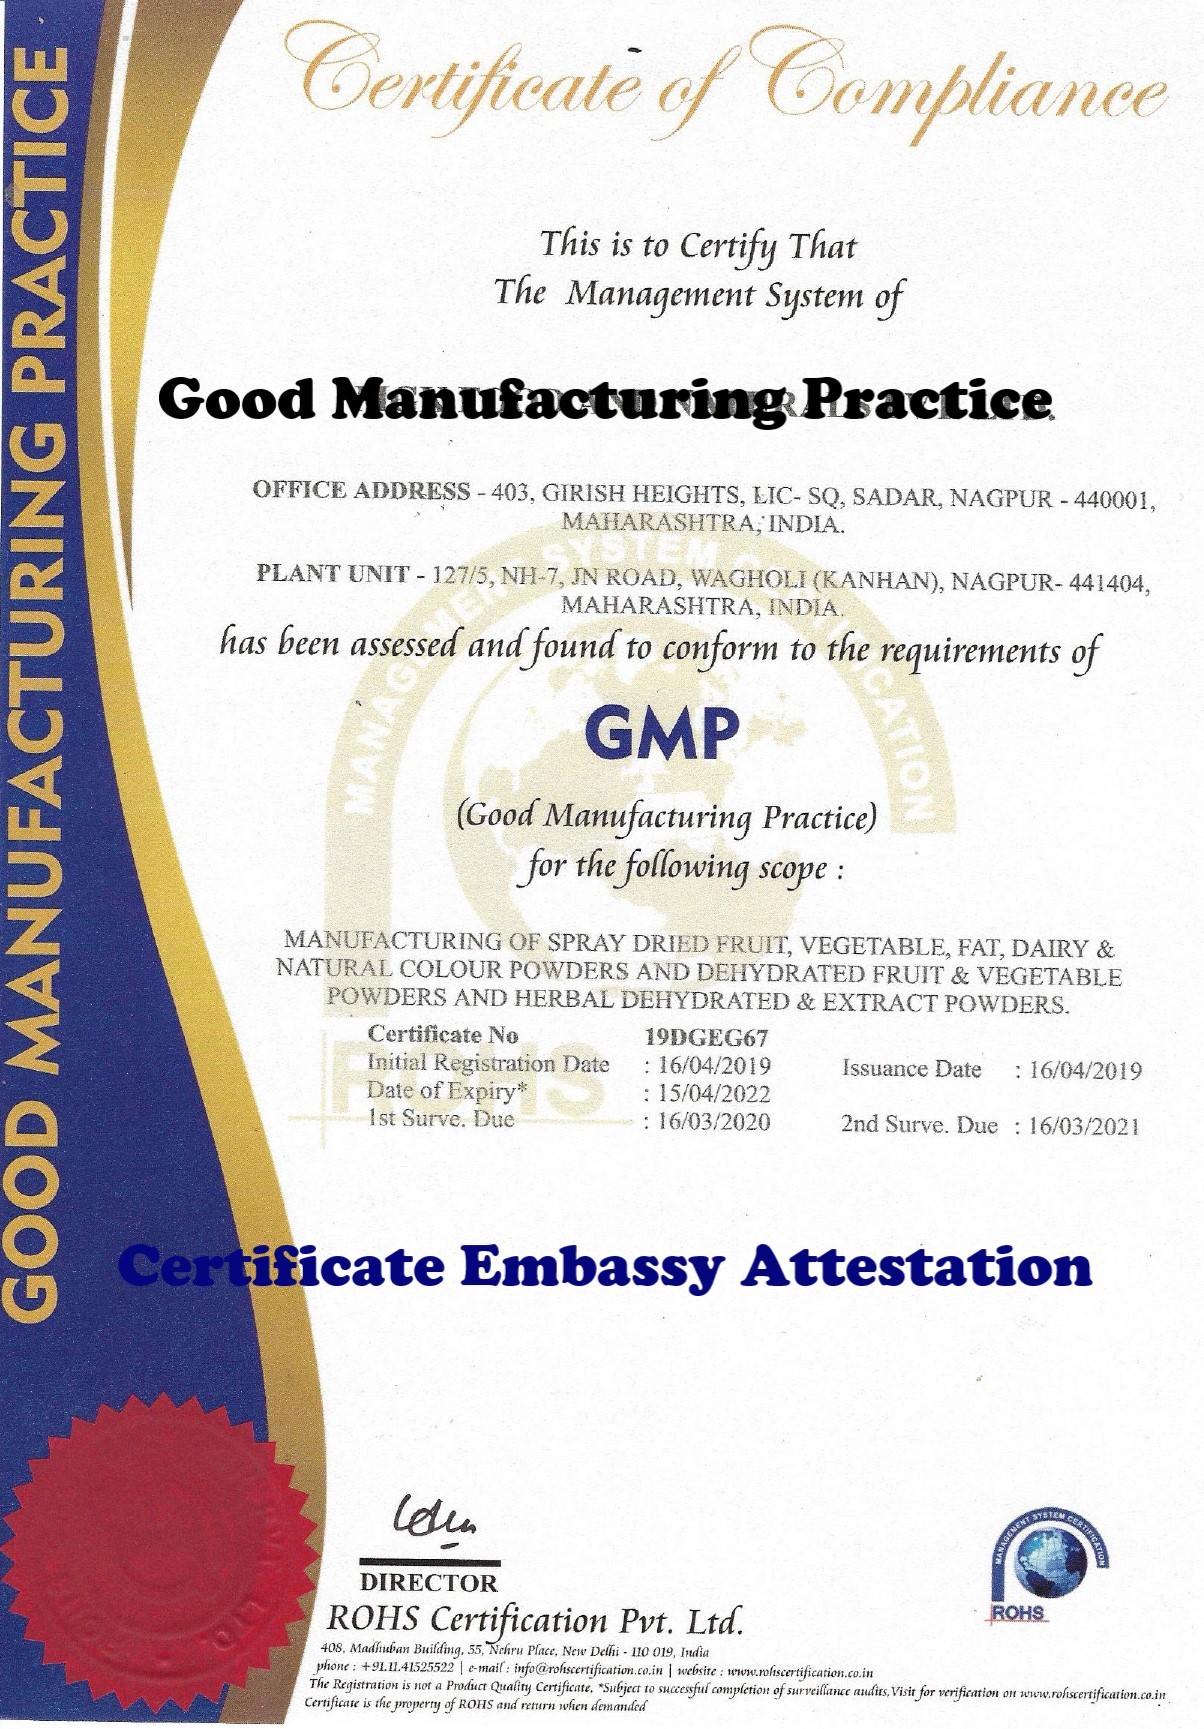 GMP Certificate Attestation from Suriname Embassy